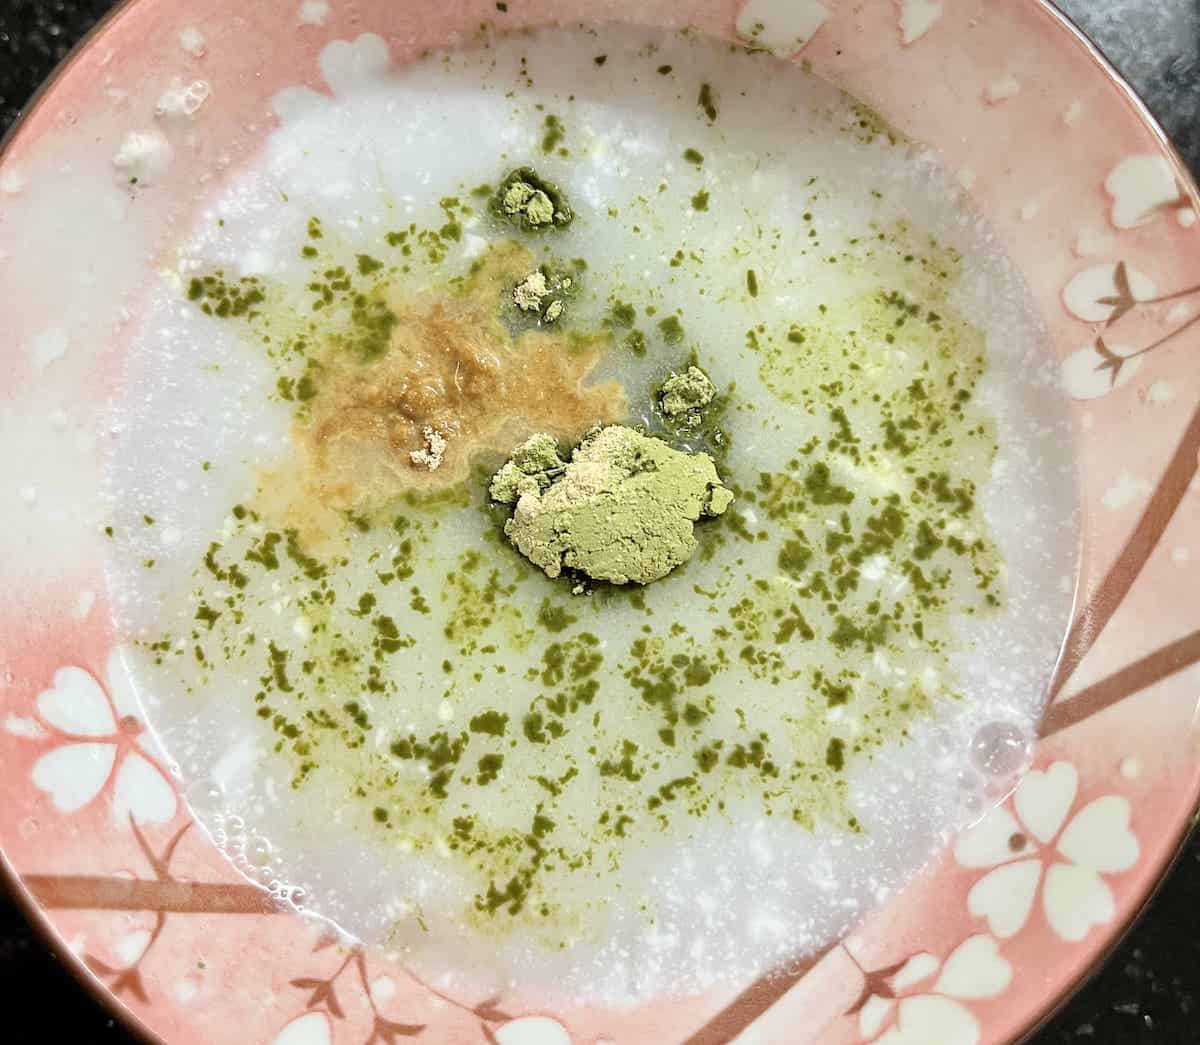 Matcha powder and ginger powder mixed with water and coconut cream.